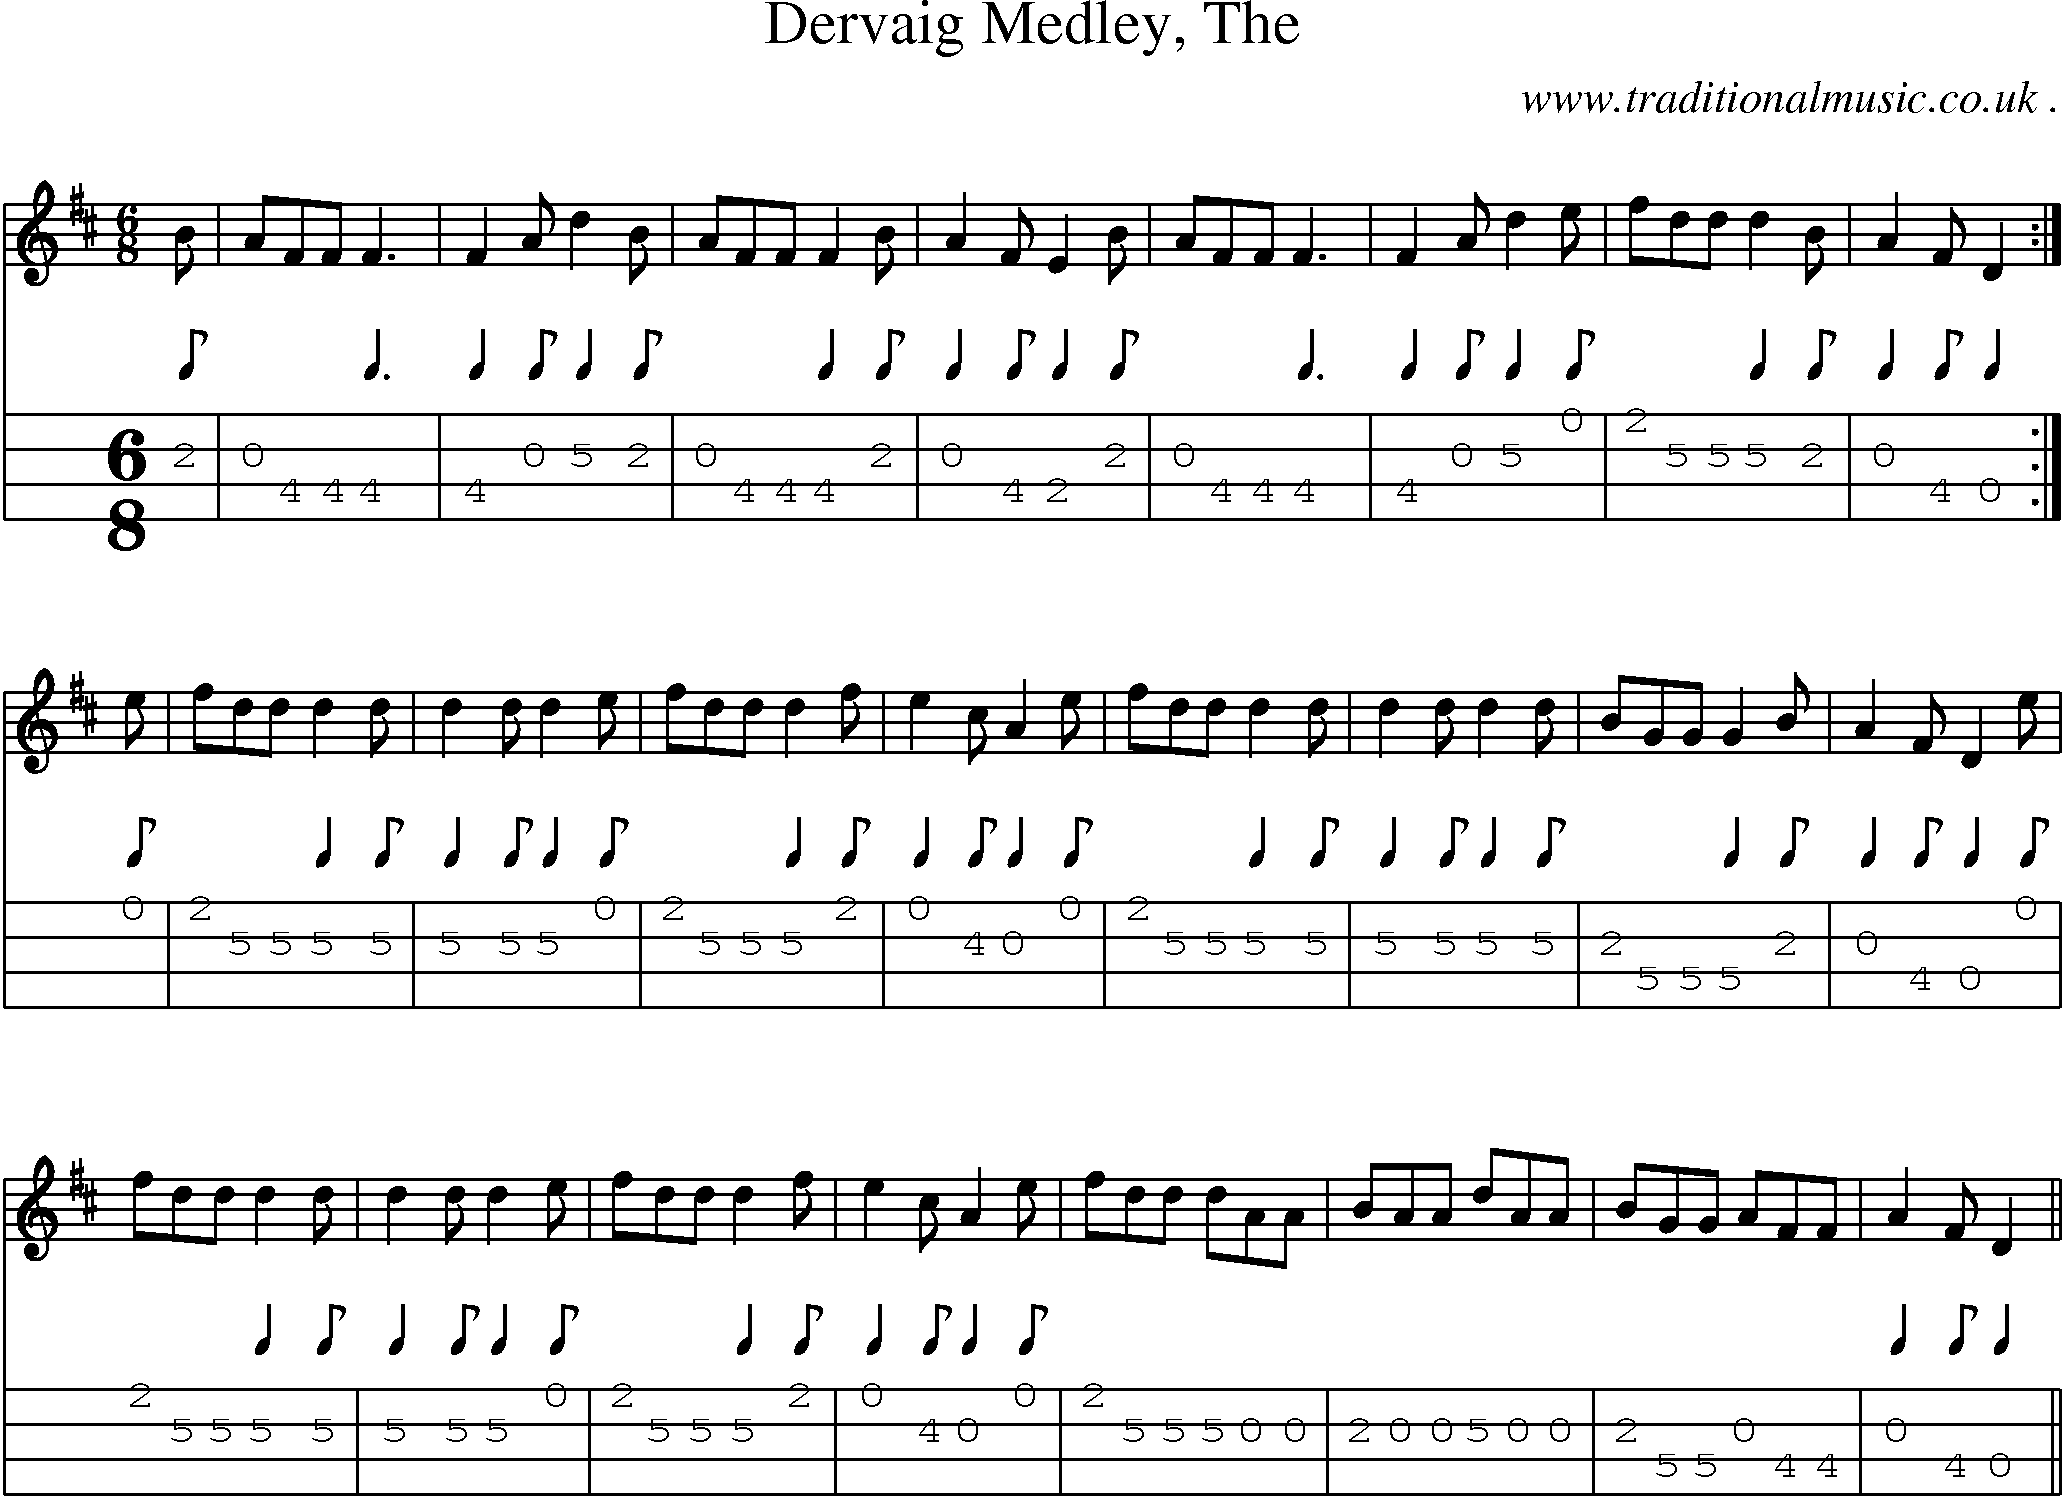 Sheet-music  score, Chords and Mandolin Tabs for Dervaig Medley The